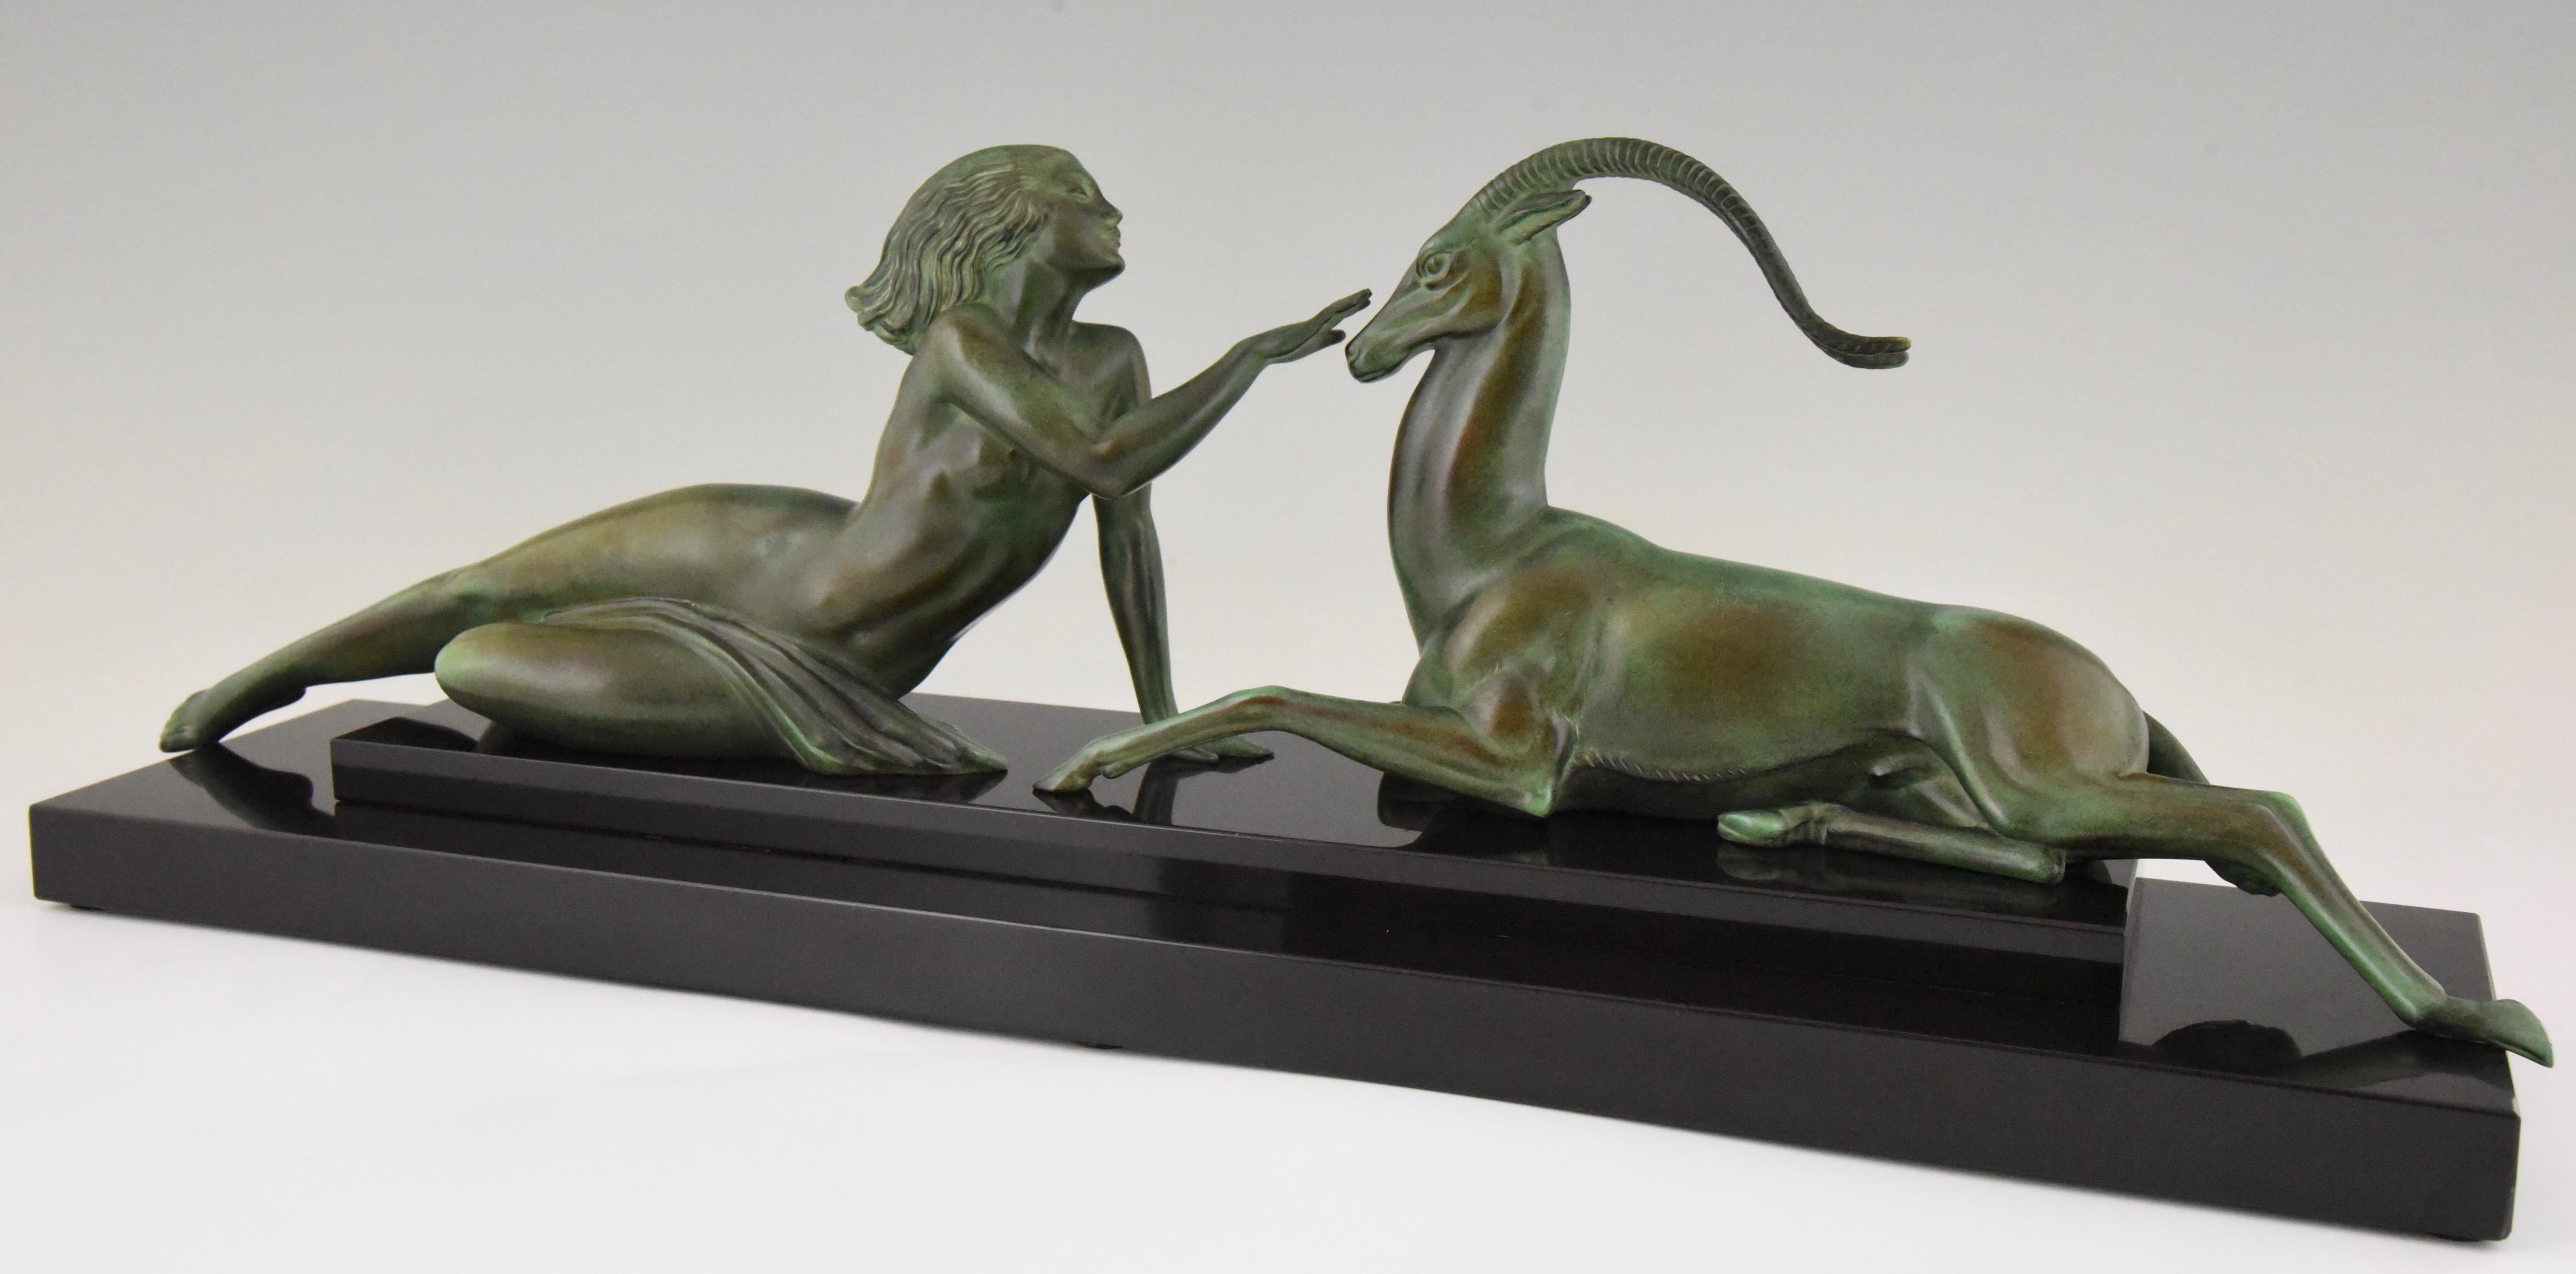 Seduction, elegant Art Deco sculpture of a nude with gazelle by Pierre Le Faguays. Art metal with green patina on a Belgian Black marble base. France 1930

This model is illustrated in several books:?
“Art Deco sculpture” by Victor Arwas,